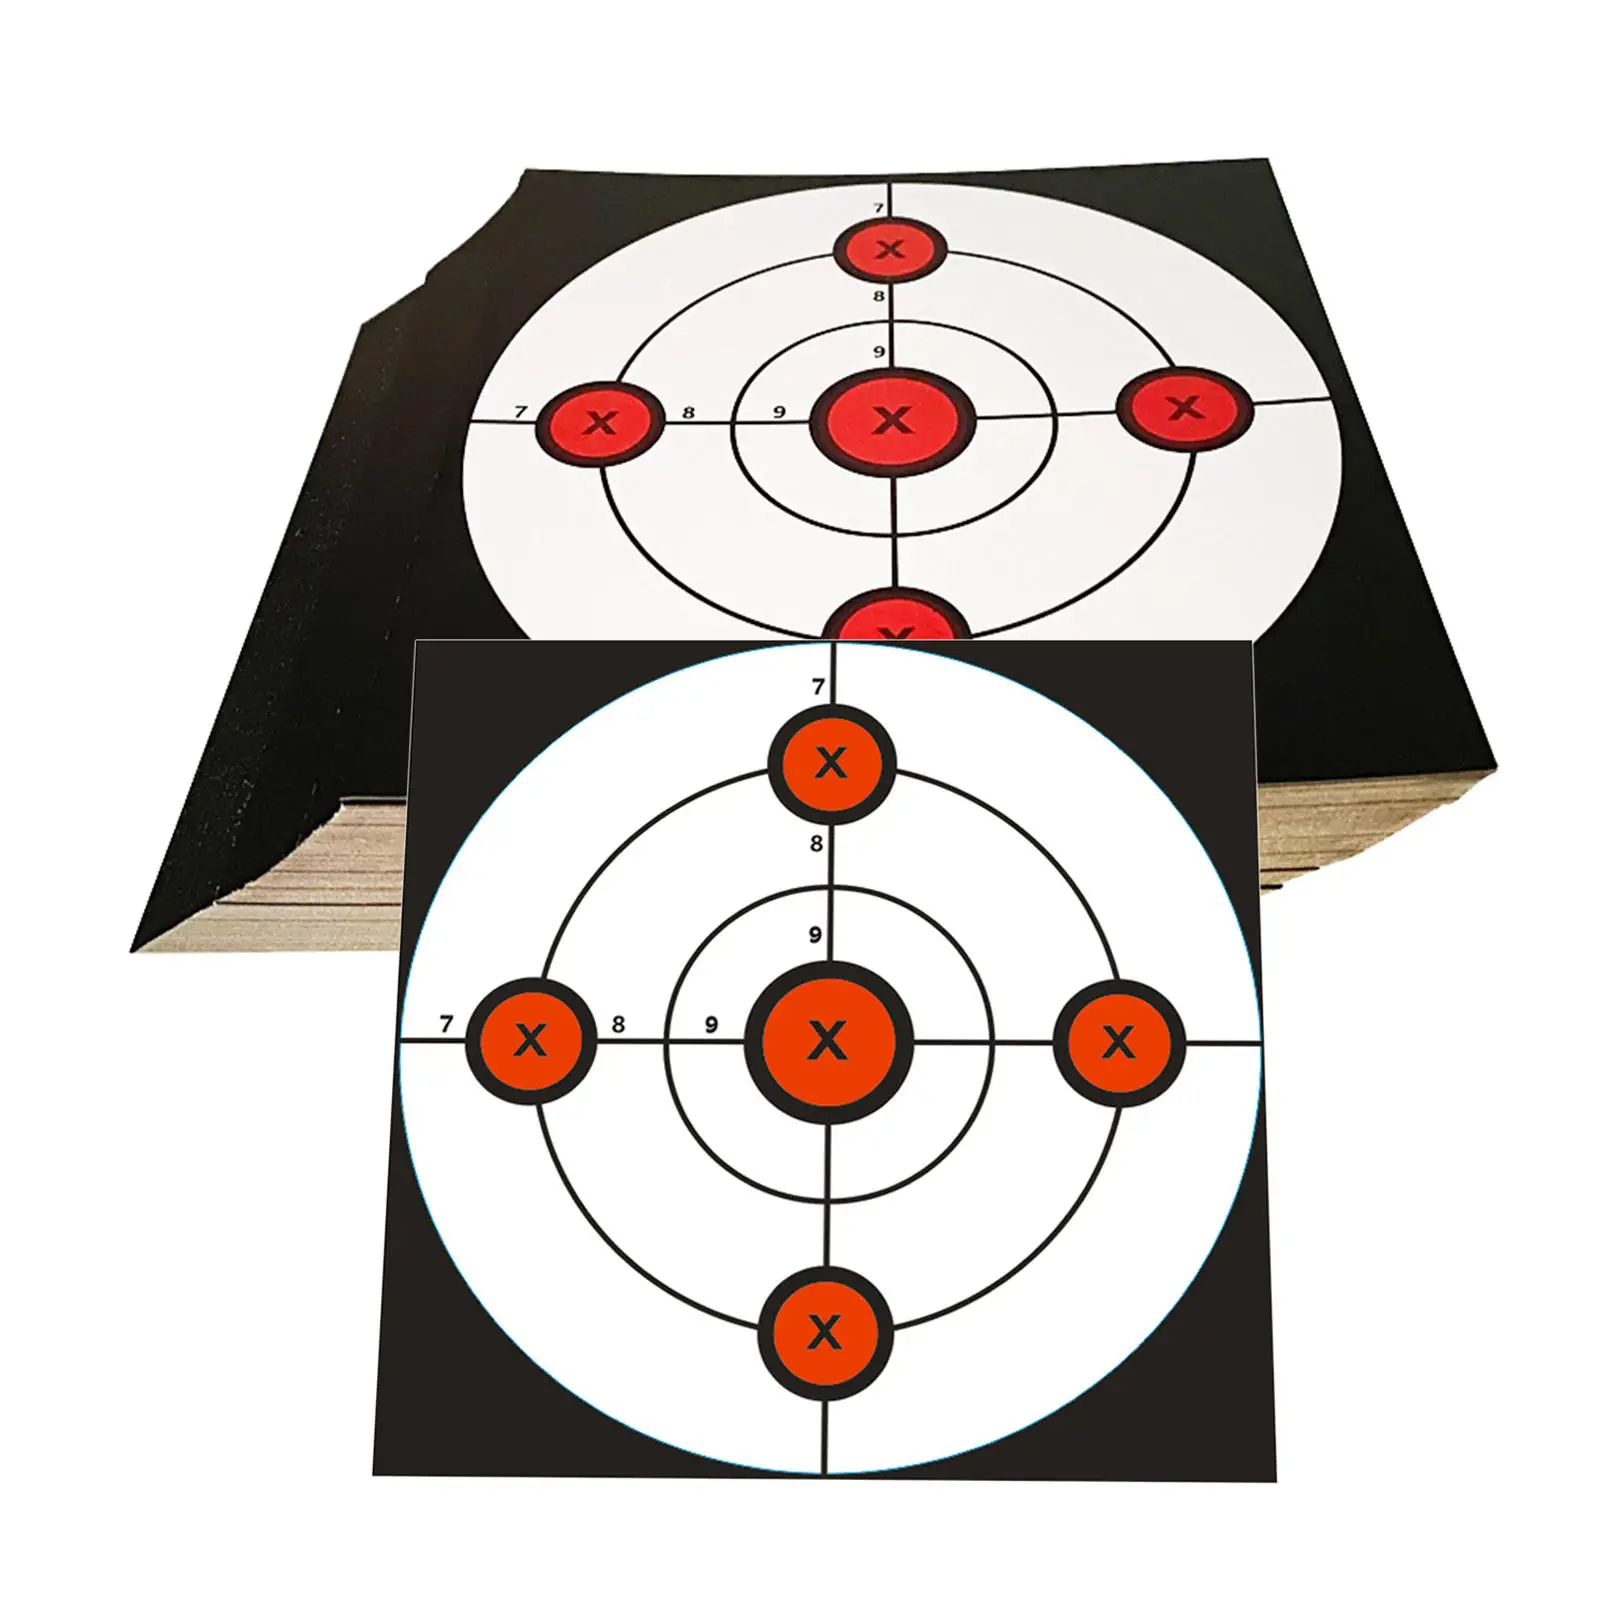 100x Target Shooting Paper Sheets Object Sheets Object Aids Target Dots 6inch Aim for Slingshot Archery Hunt Training Practicing